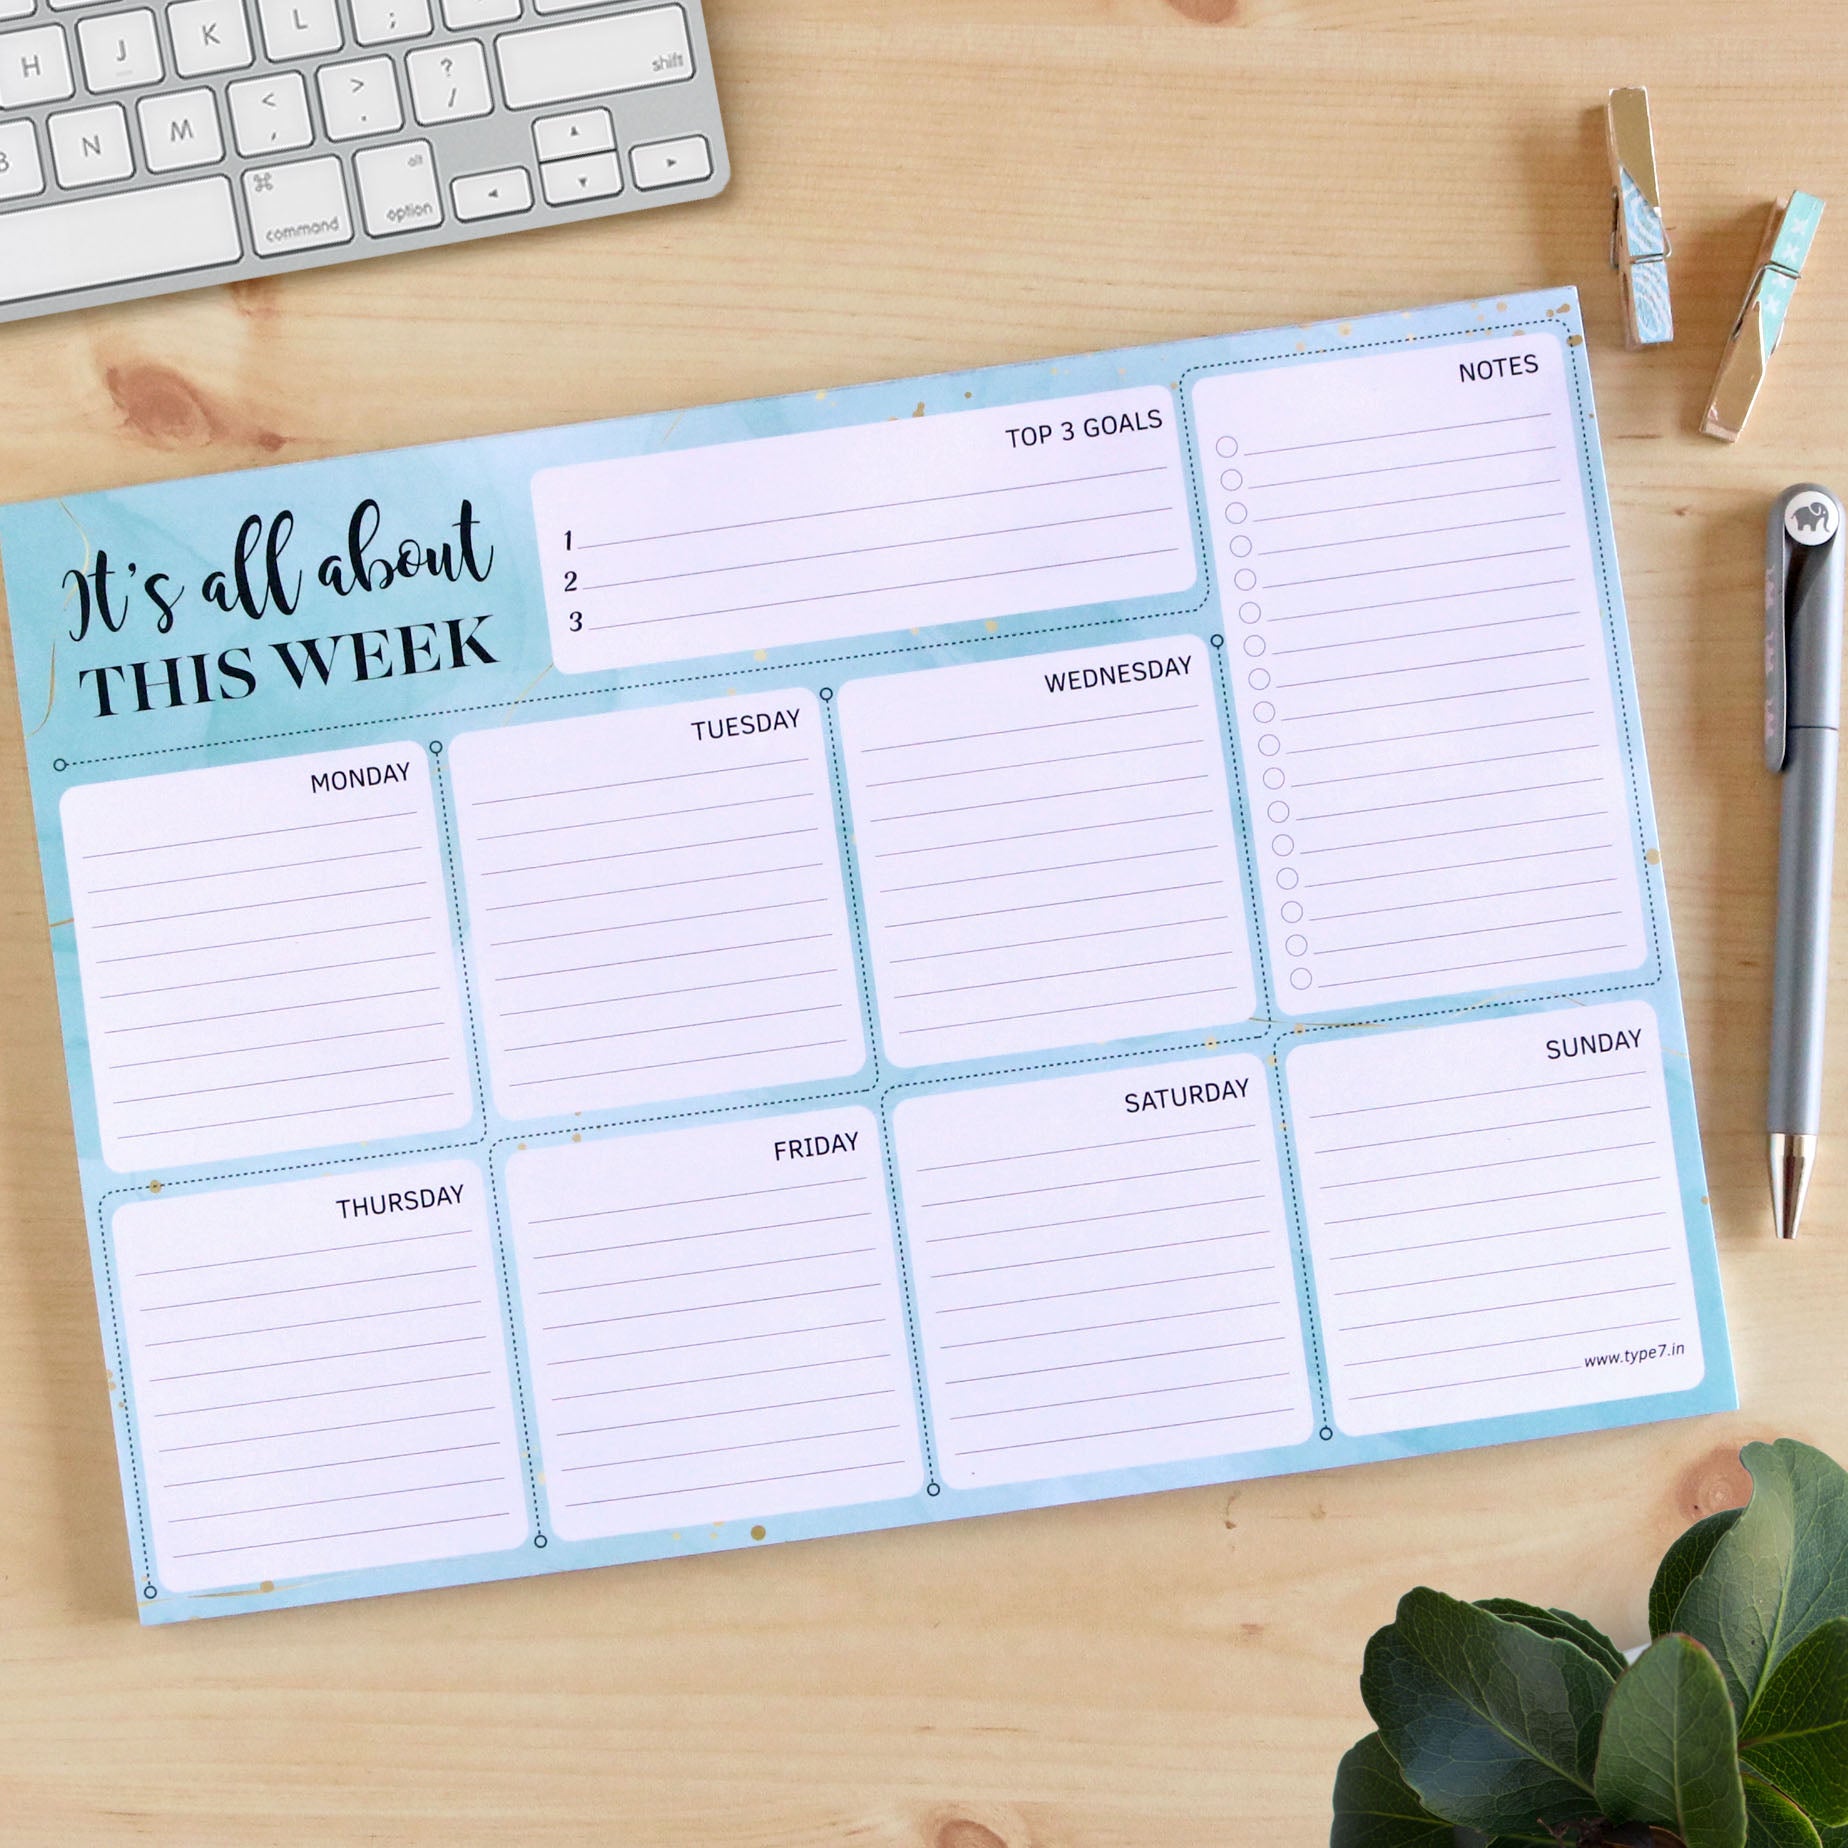 Set of 2 Weekly Planners - This Week & What's Cooking